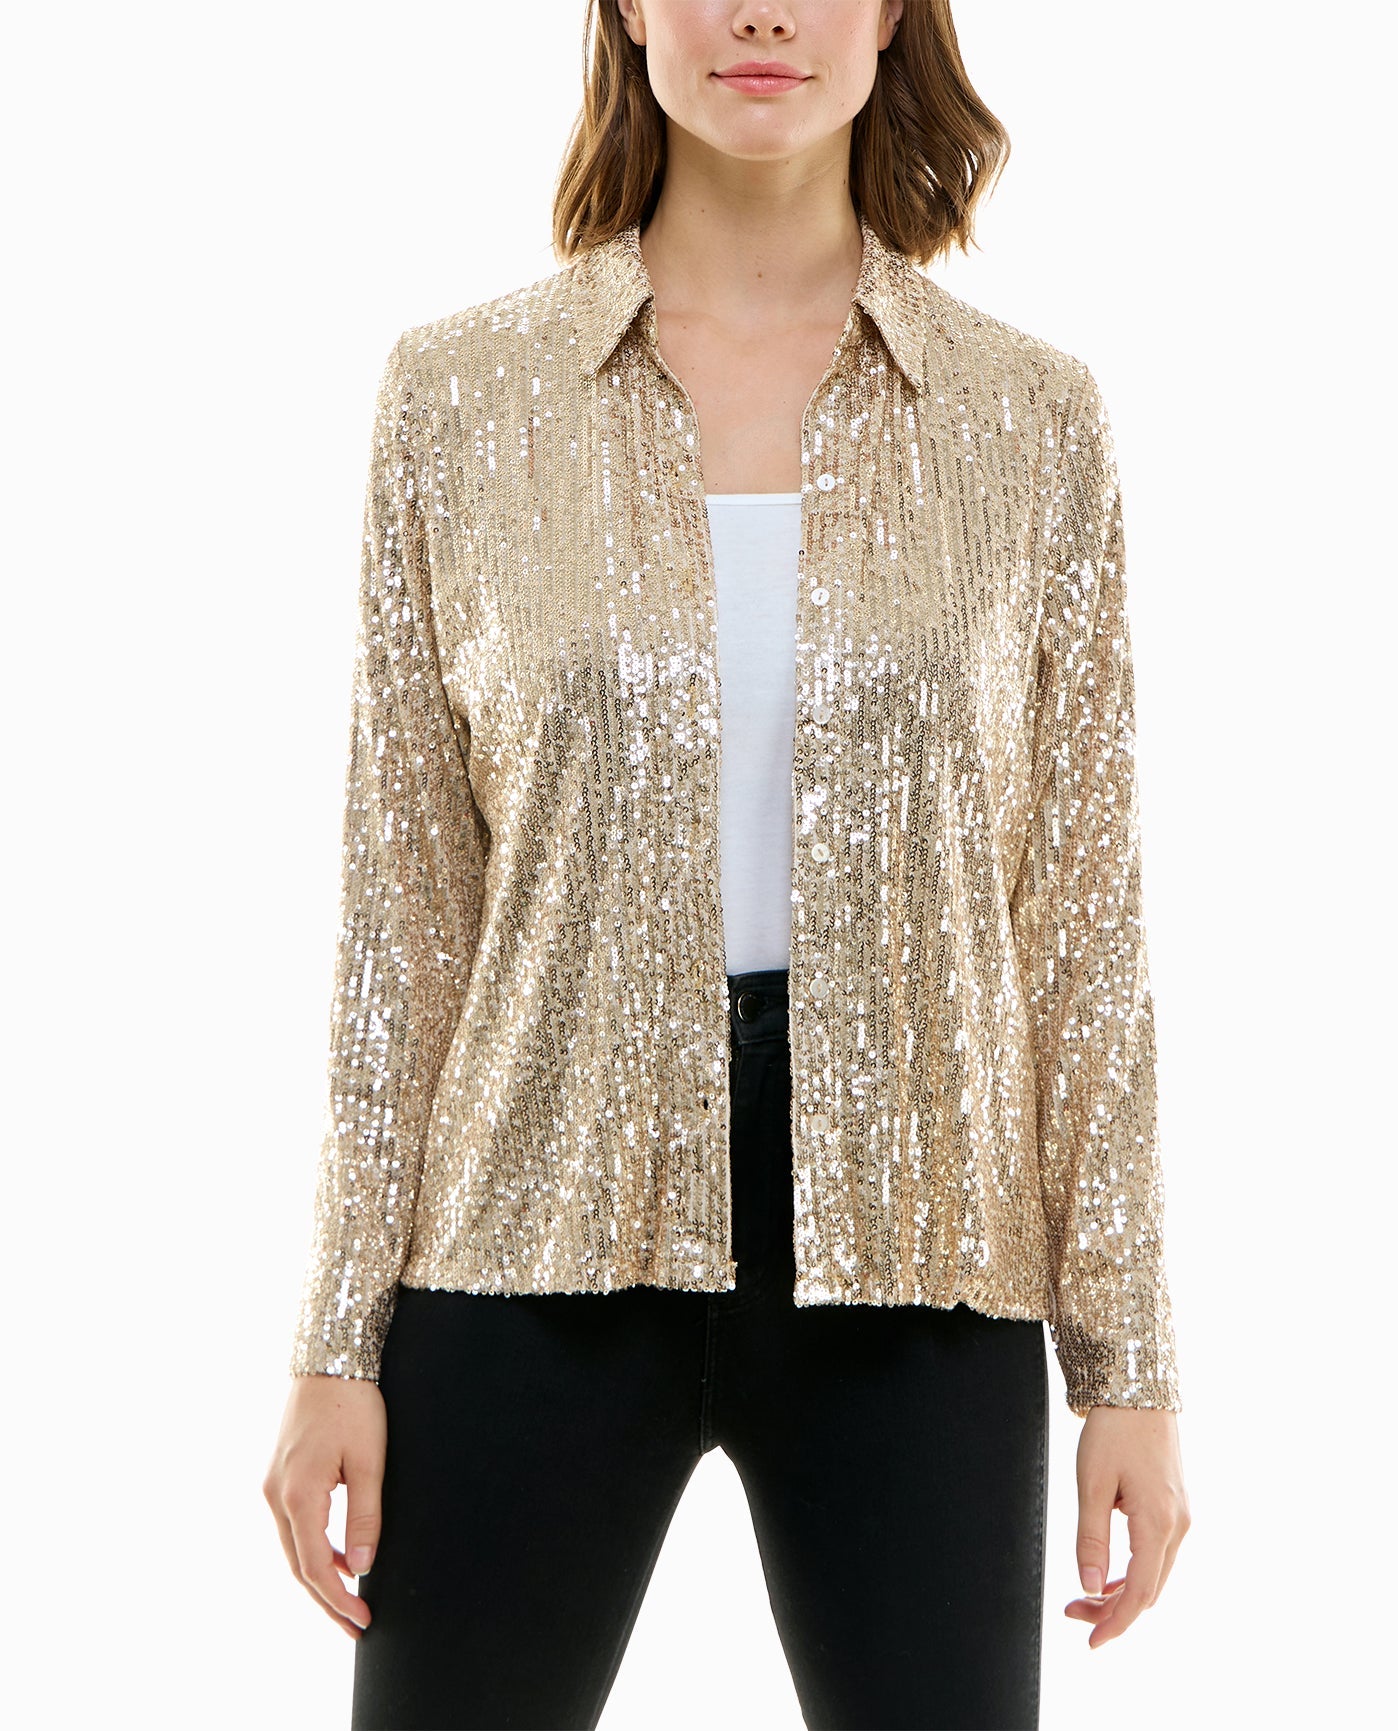 ALTERNATE FRONT VIEW OF NORA SEQUIN BUTTON FRONT SHIRT | Champagne